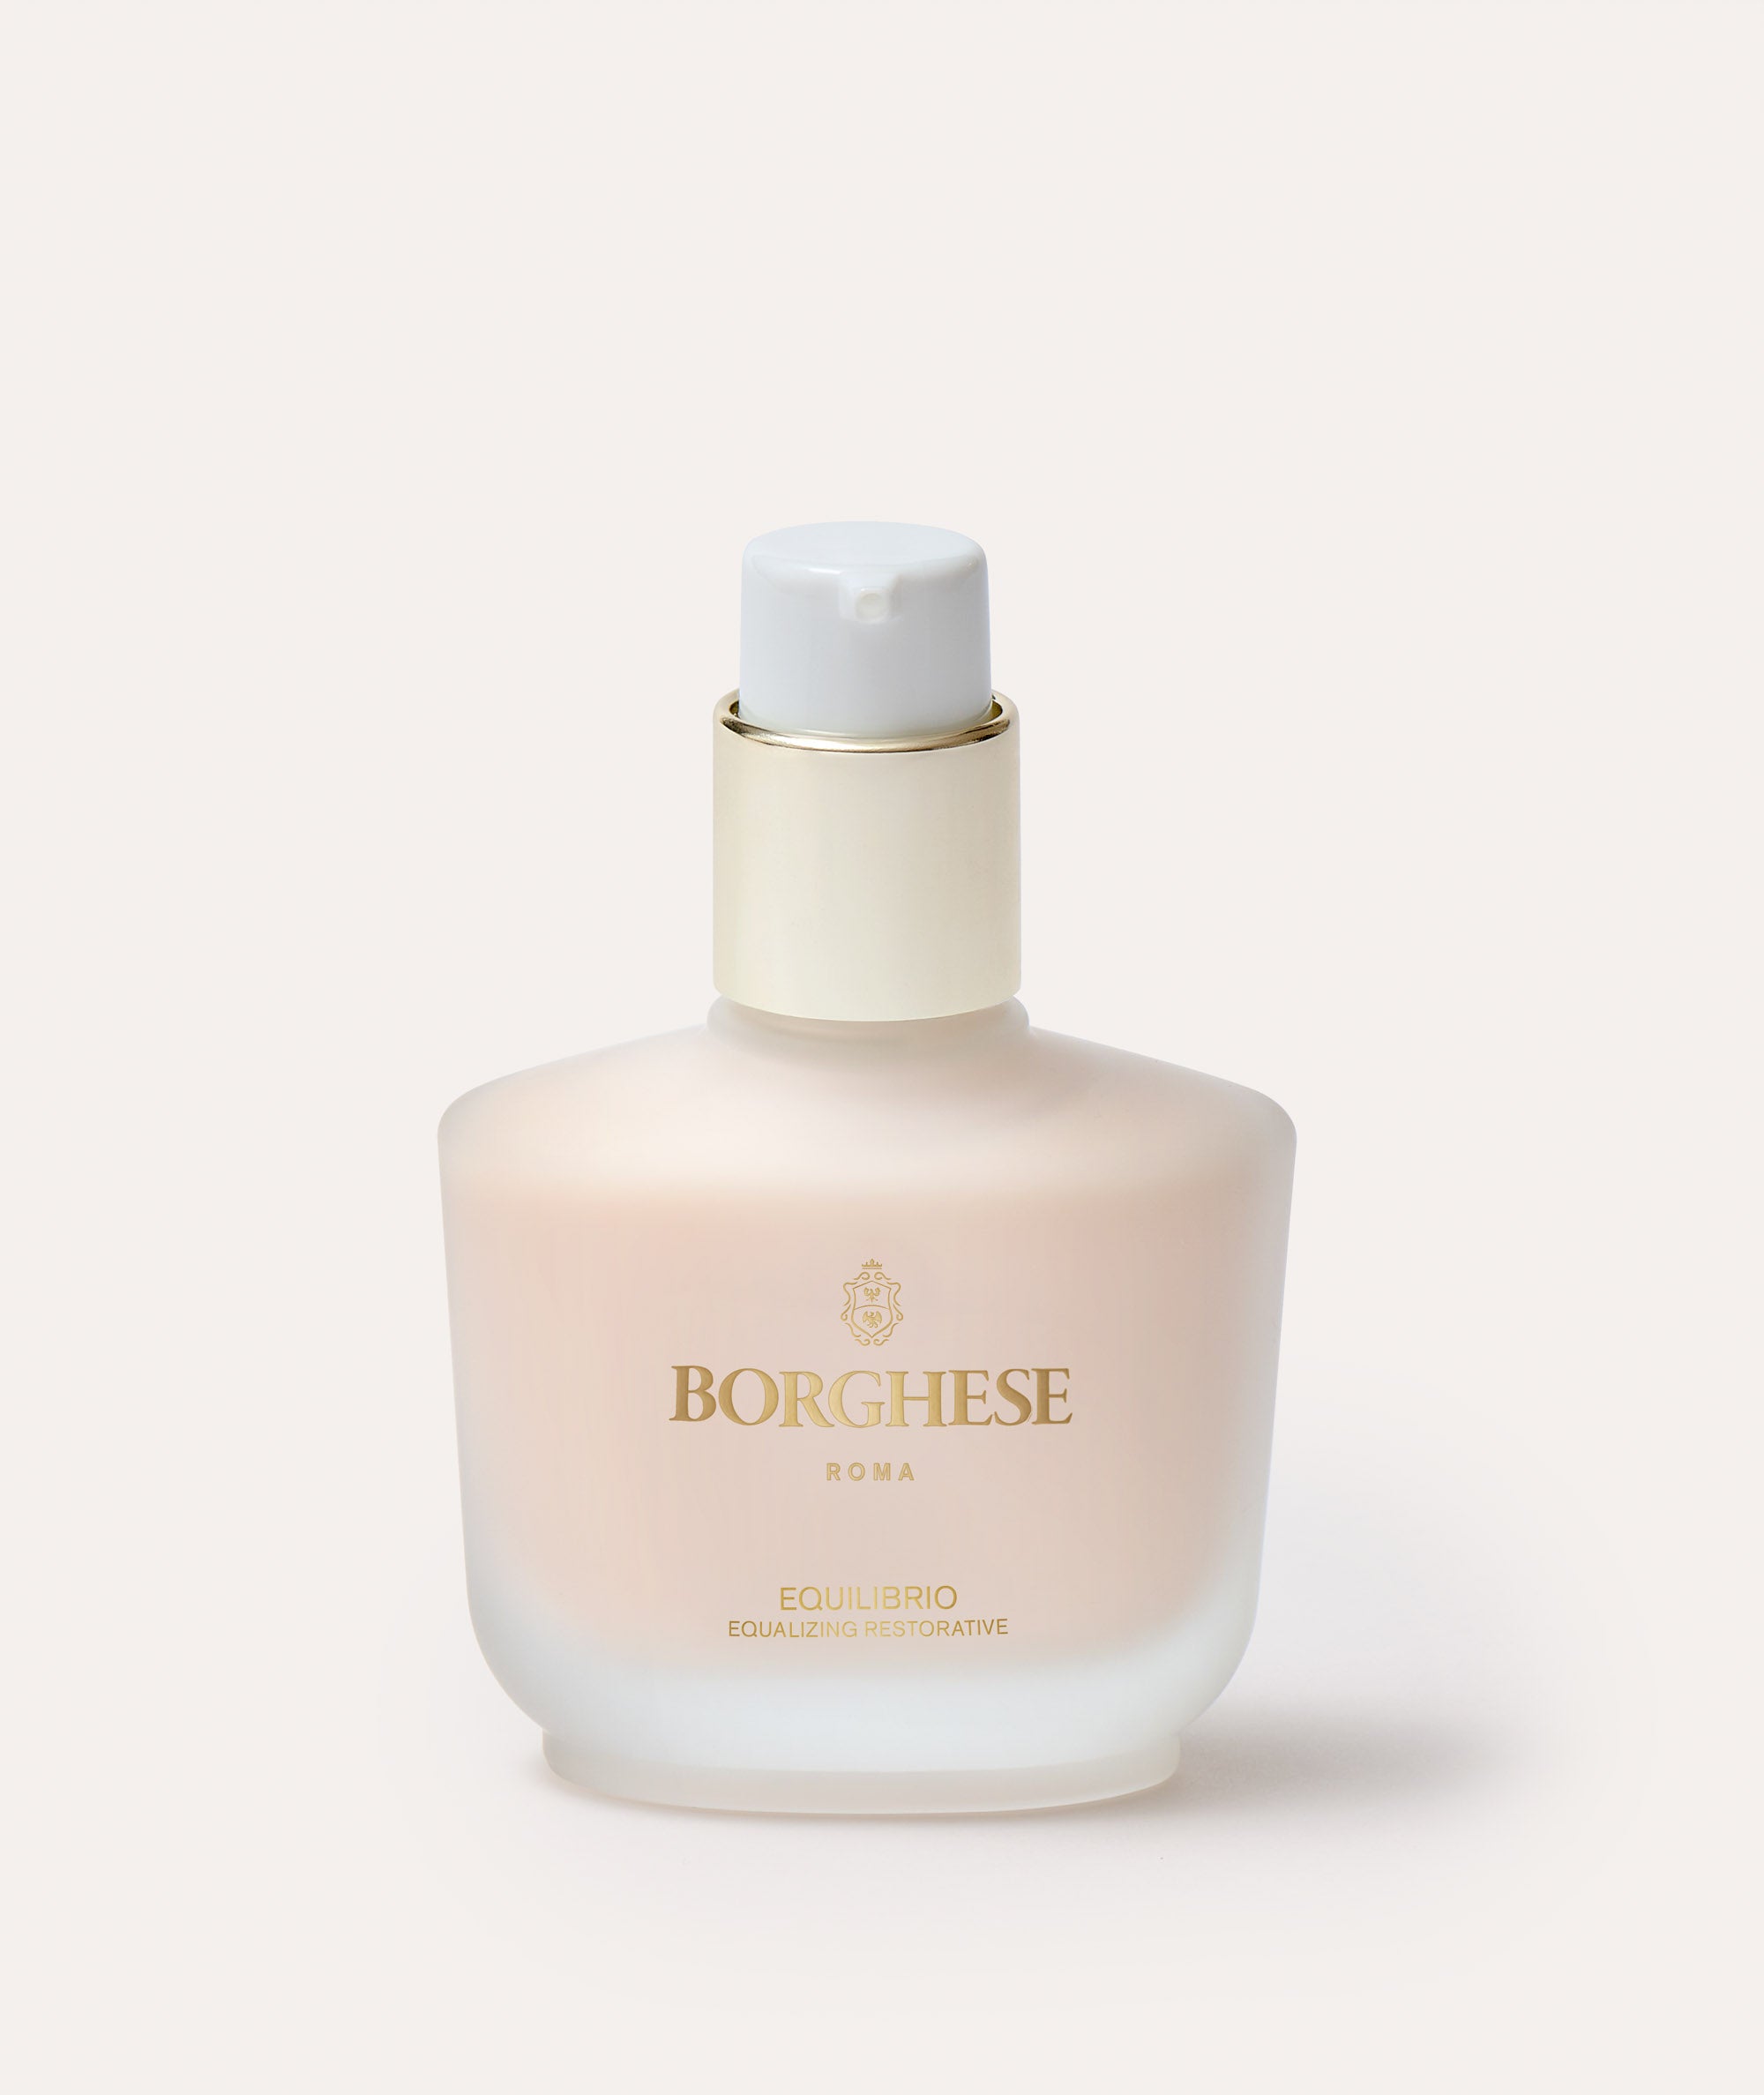 This is a picture of the Borghese Equilibrio Daily Moisturizer bottle